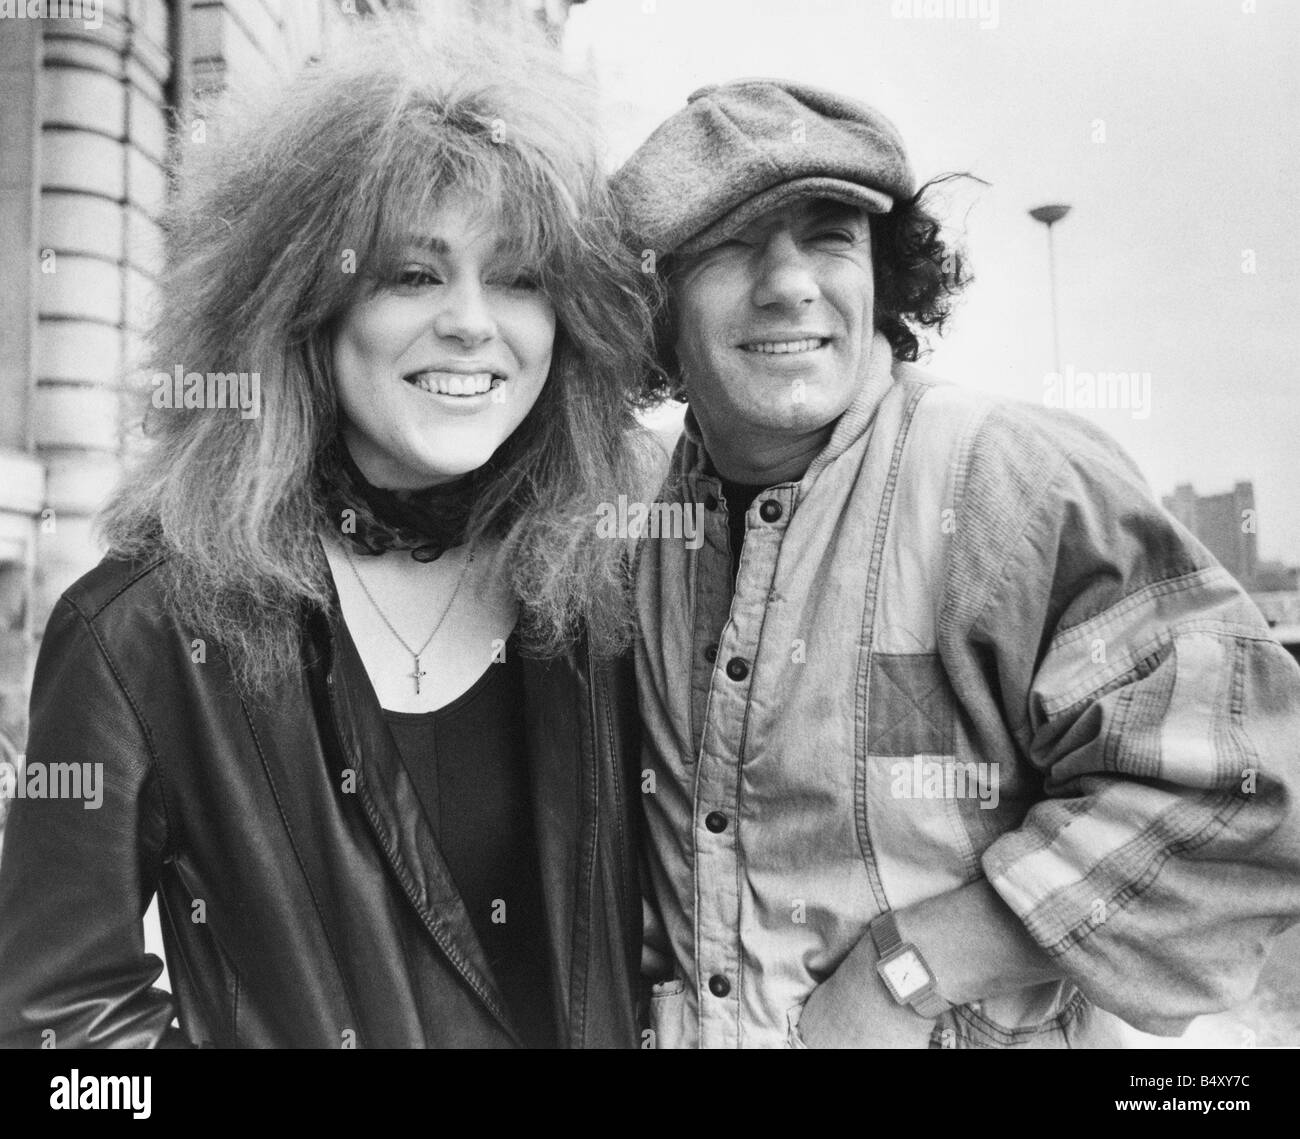 Brian Johnson lead singer of rock group AC DC pictured with Carole McInulty of the group She on the Newcastle quayside 31 01 85 Stock Photo